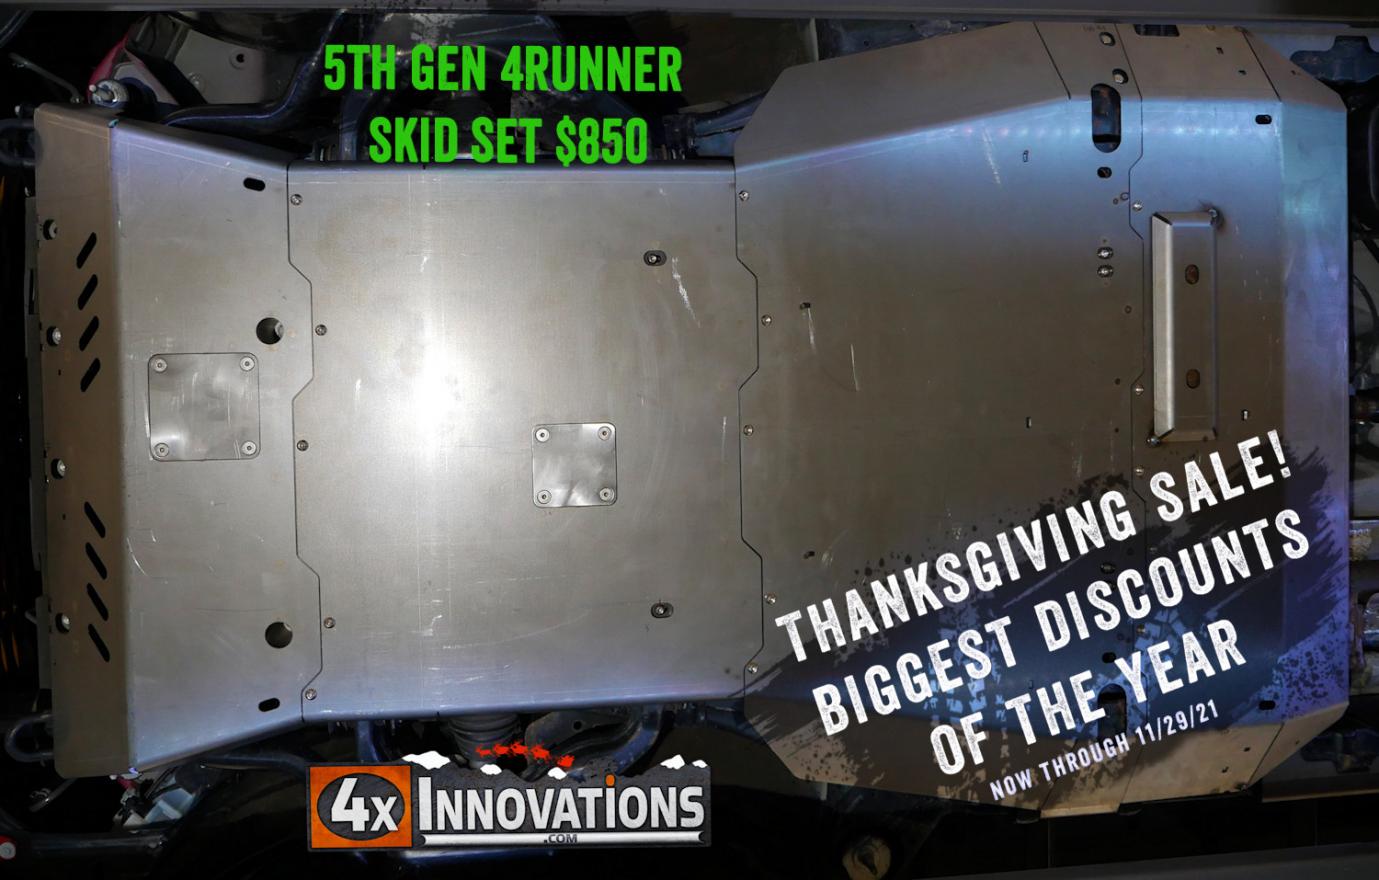 Black Friday/Cyber Monday deals on Bumpers, Sliders and more from 4x Innovations-1214750-turkeysale_2021-jpg